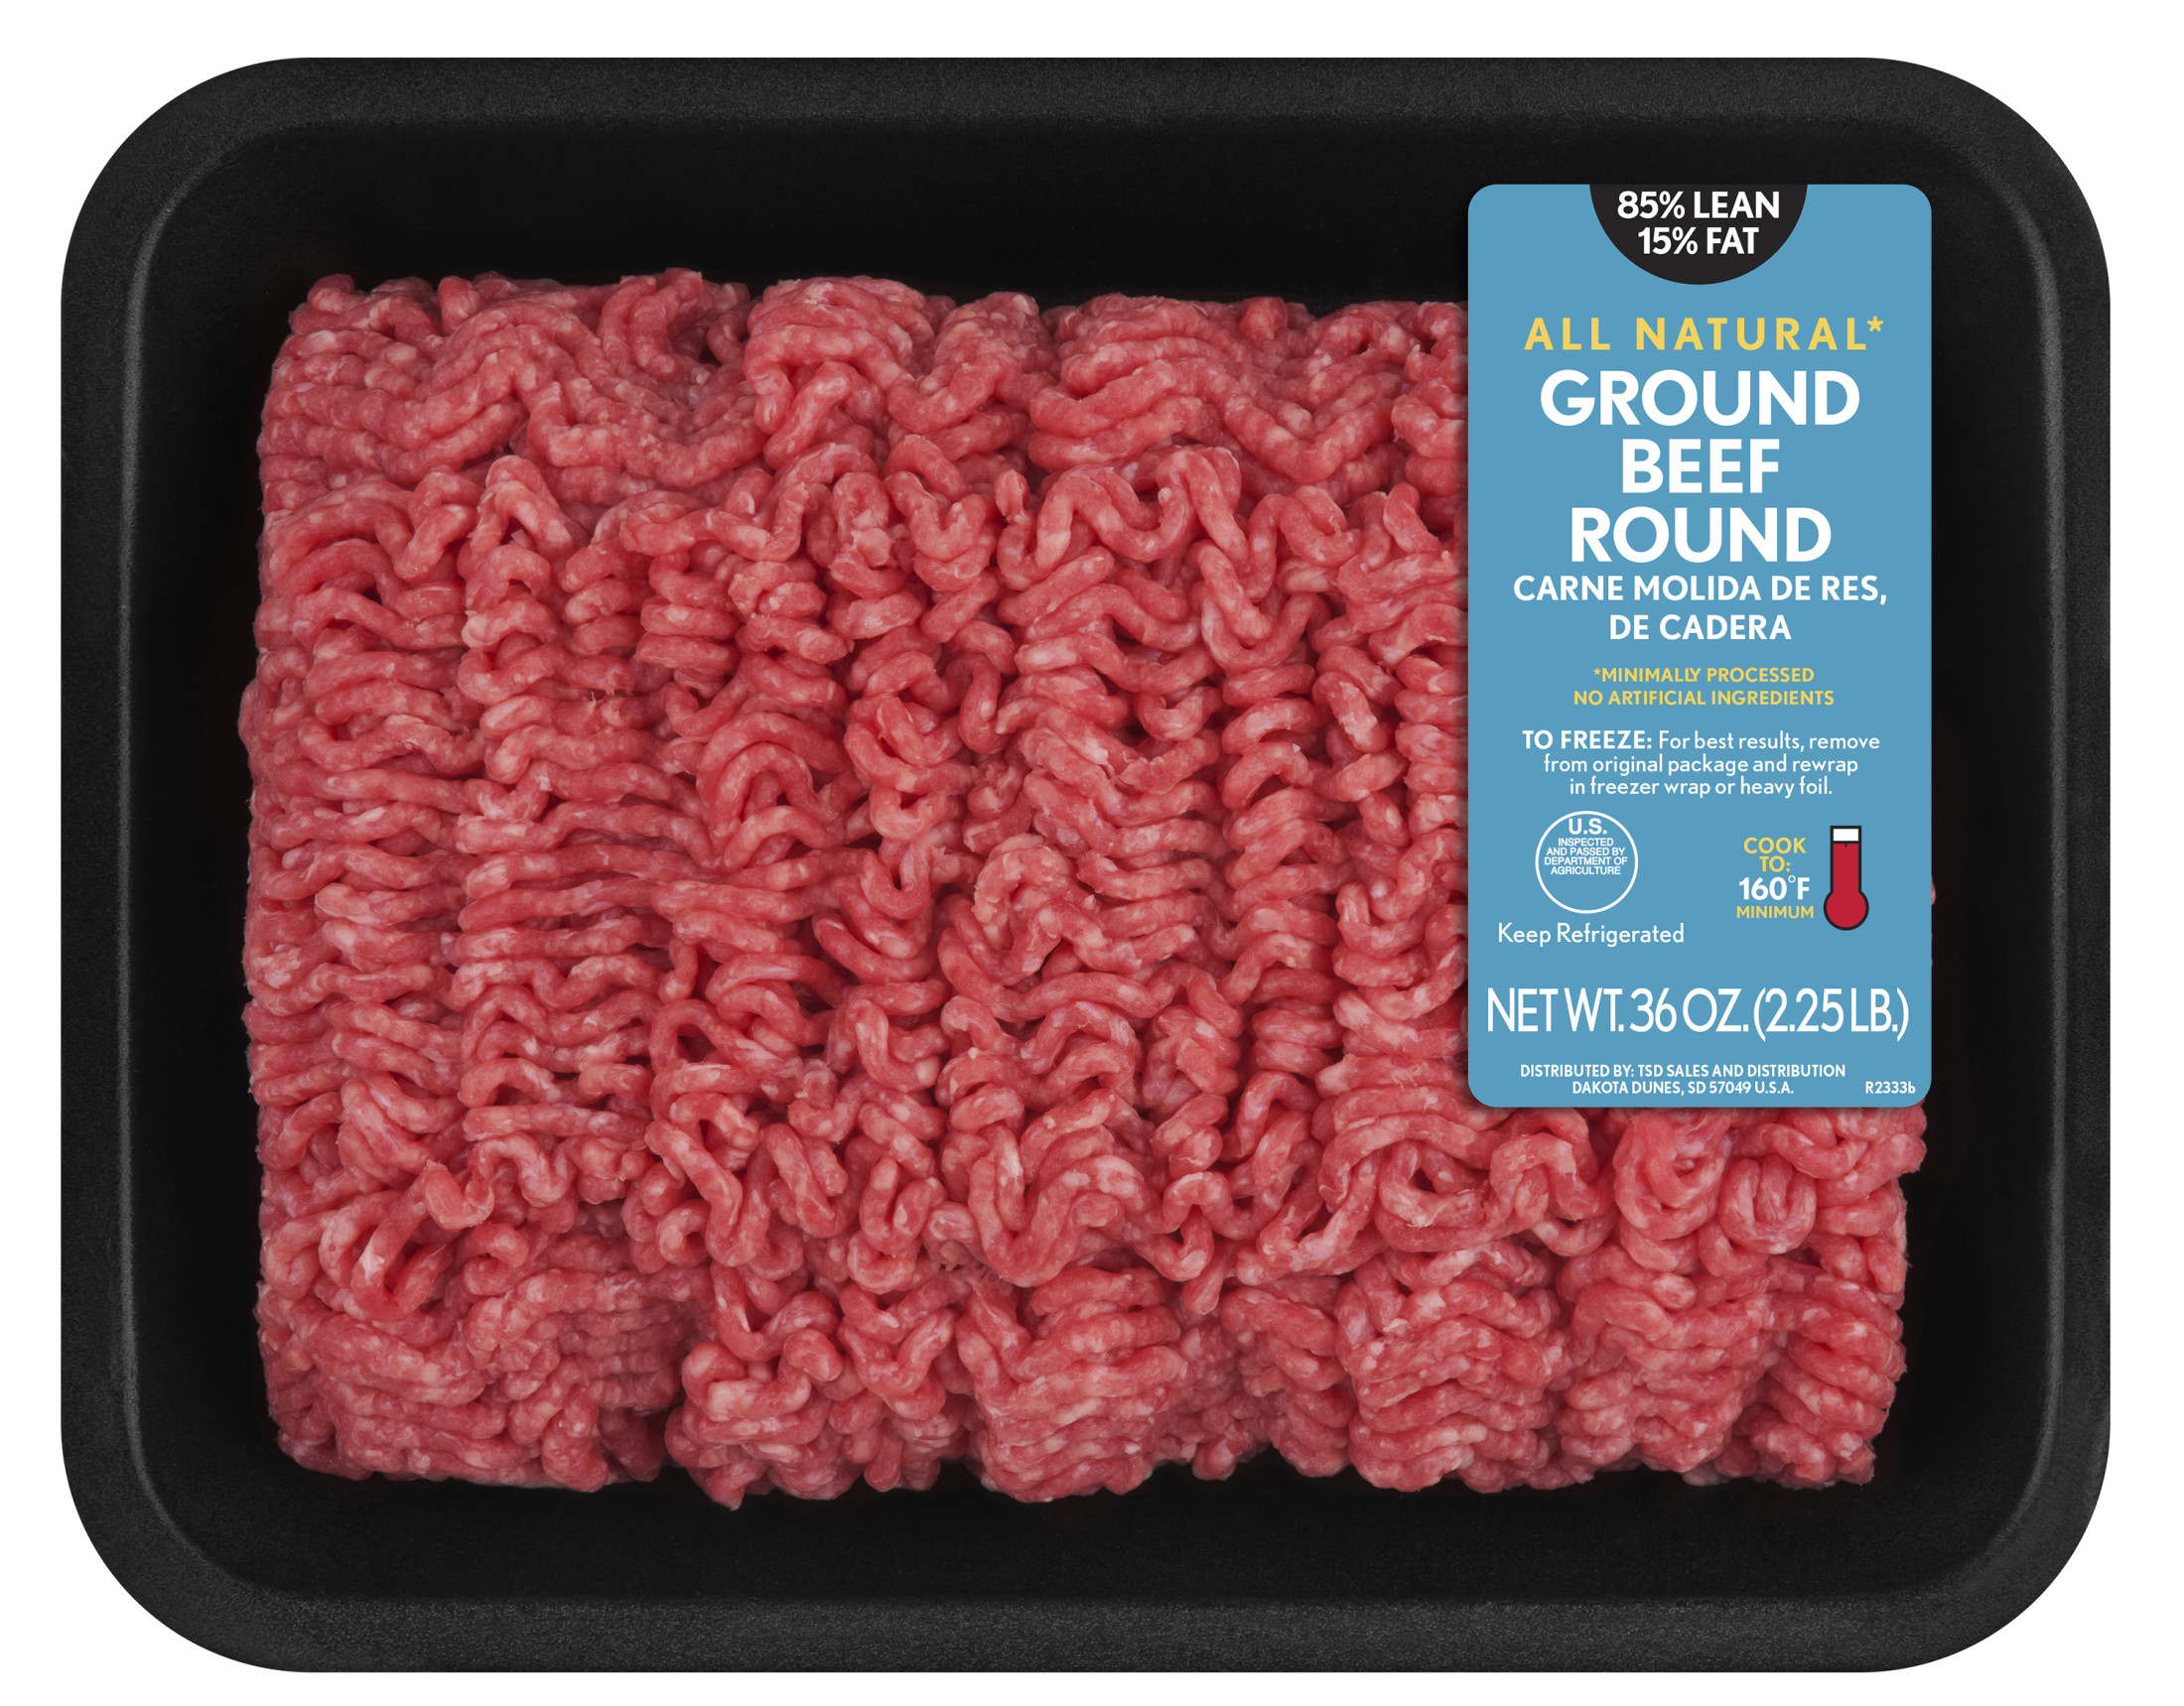 All Natural* 85% Lean/15% Fat Ground Beef Round, 2.25 lb Tray - image 1 of 7